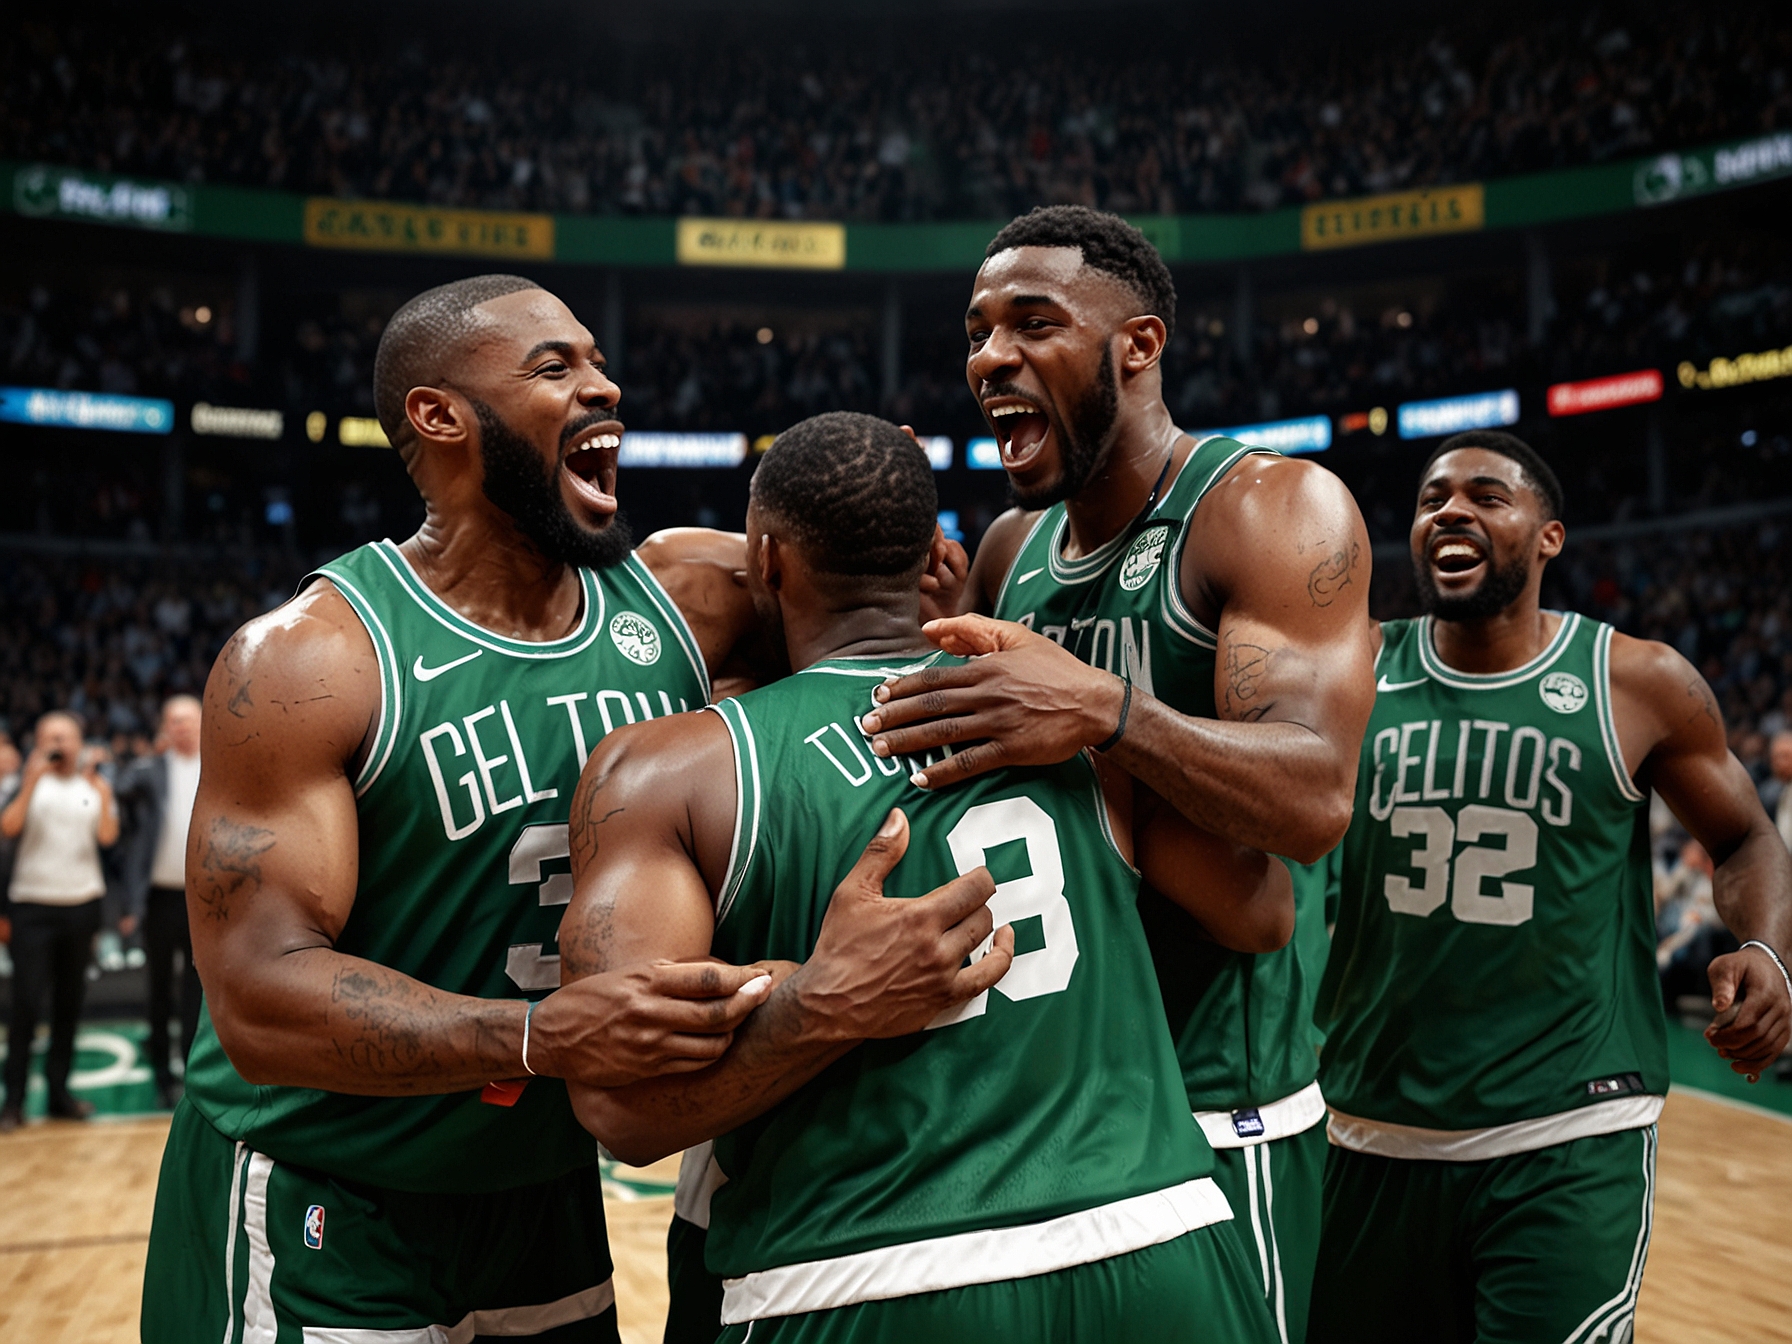 An image of the Boston Celtics celebrating their 18th NBA championship win on the court, showcasing the team's joy and unity after their decisive 4-1 series victory against the Dallas Mavericks.